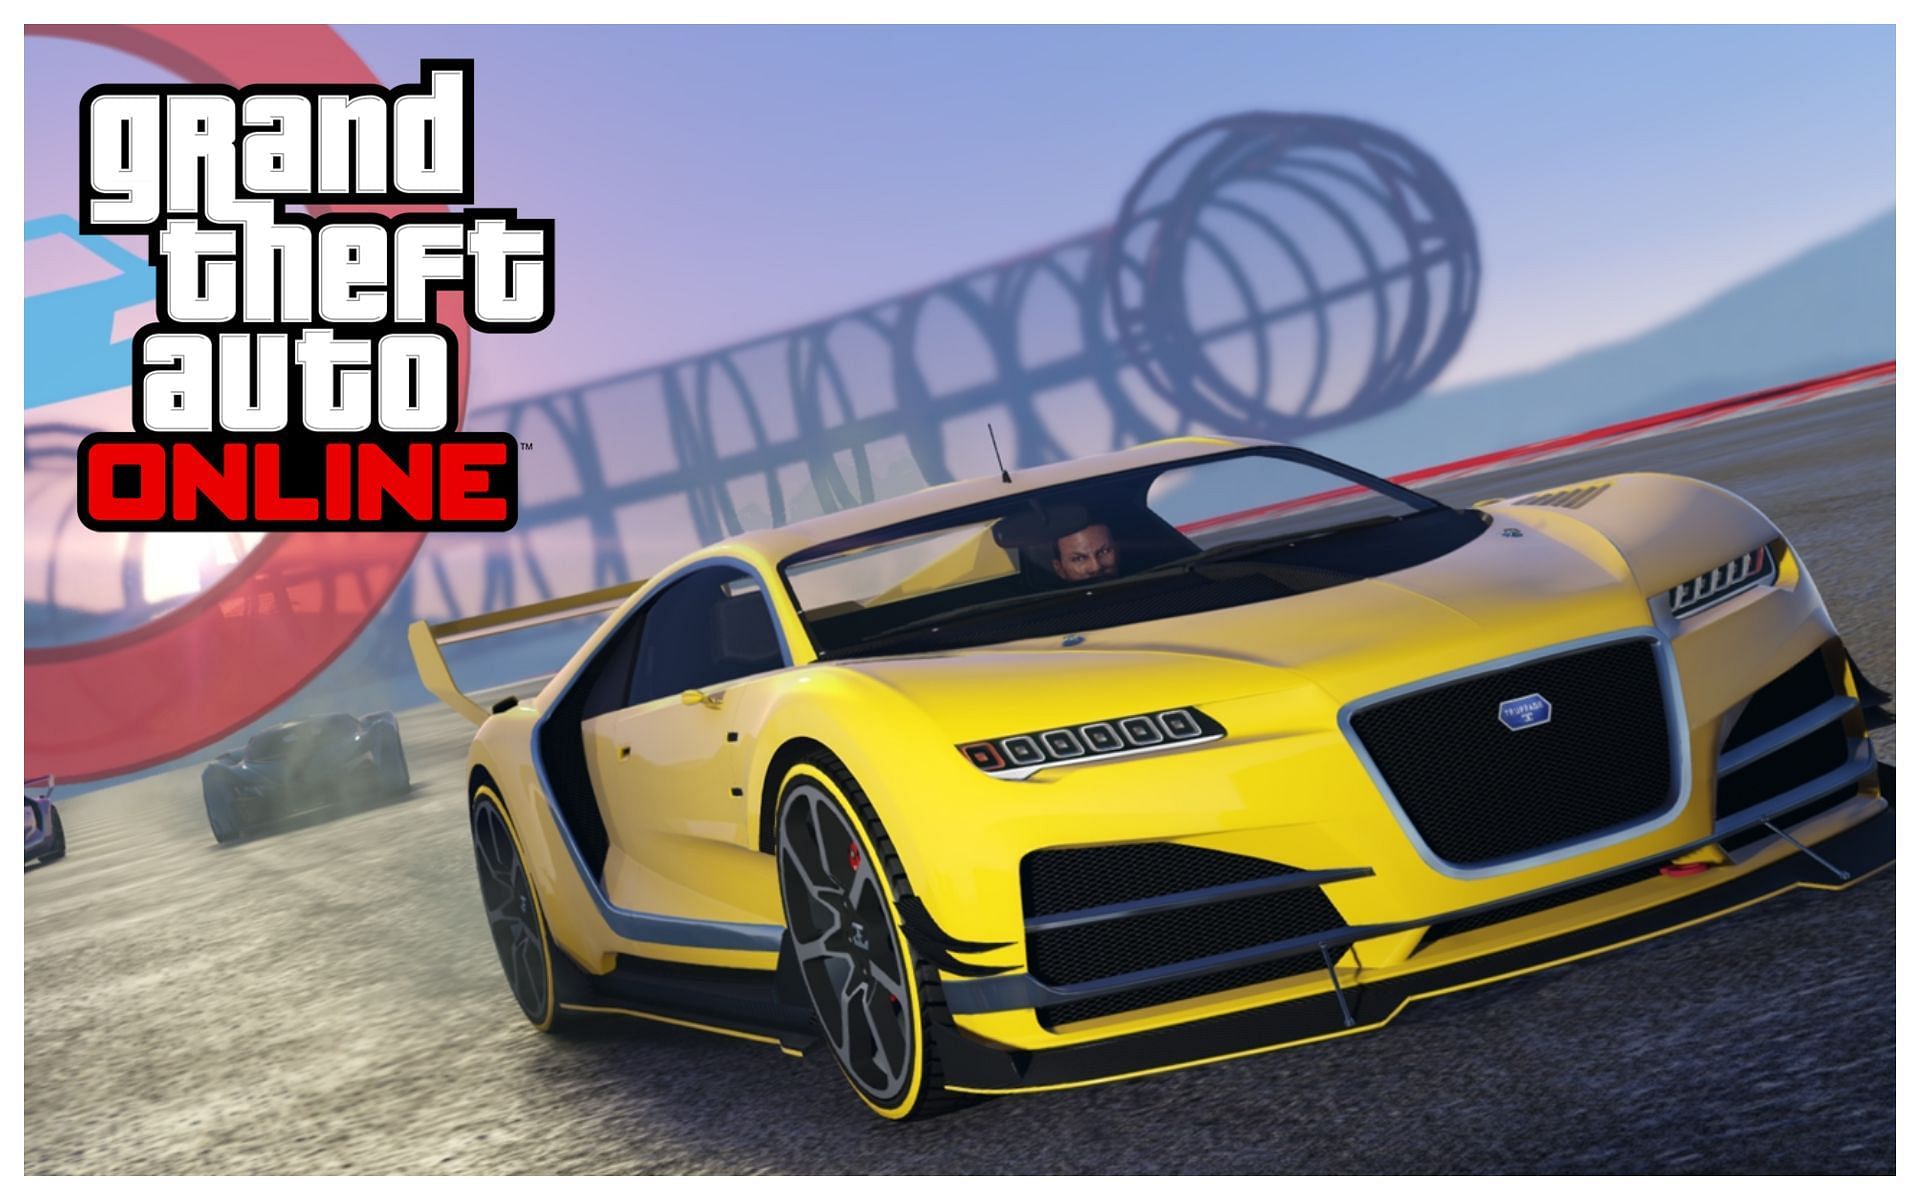 Cars in Grand Theft Auto Online are amazing (Images via Rockstar Games)